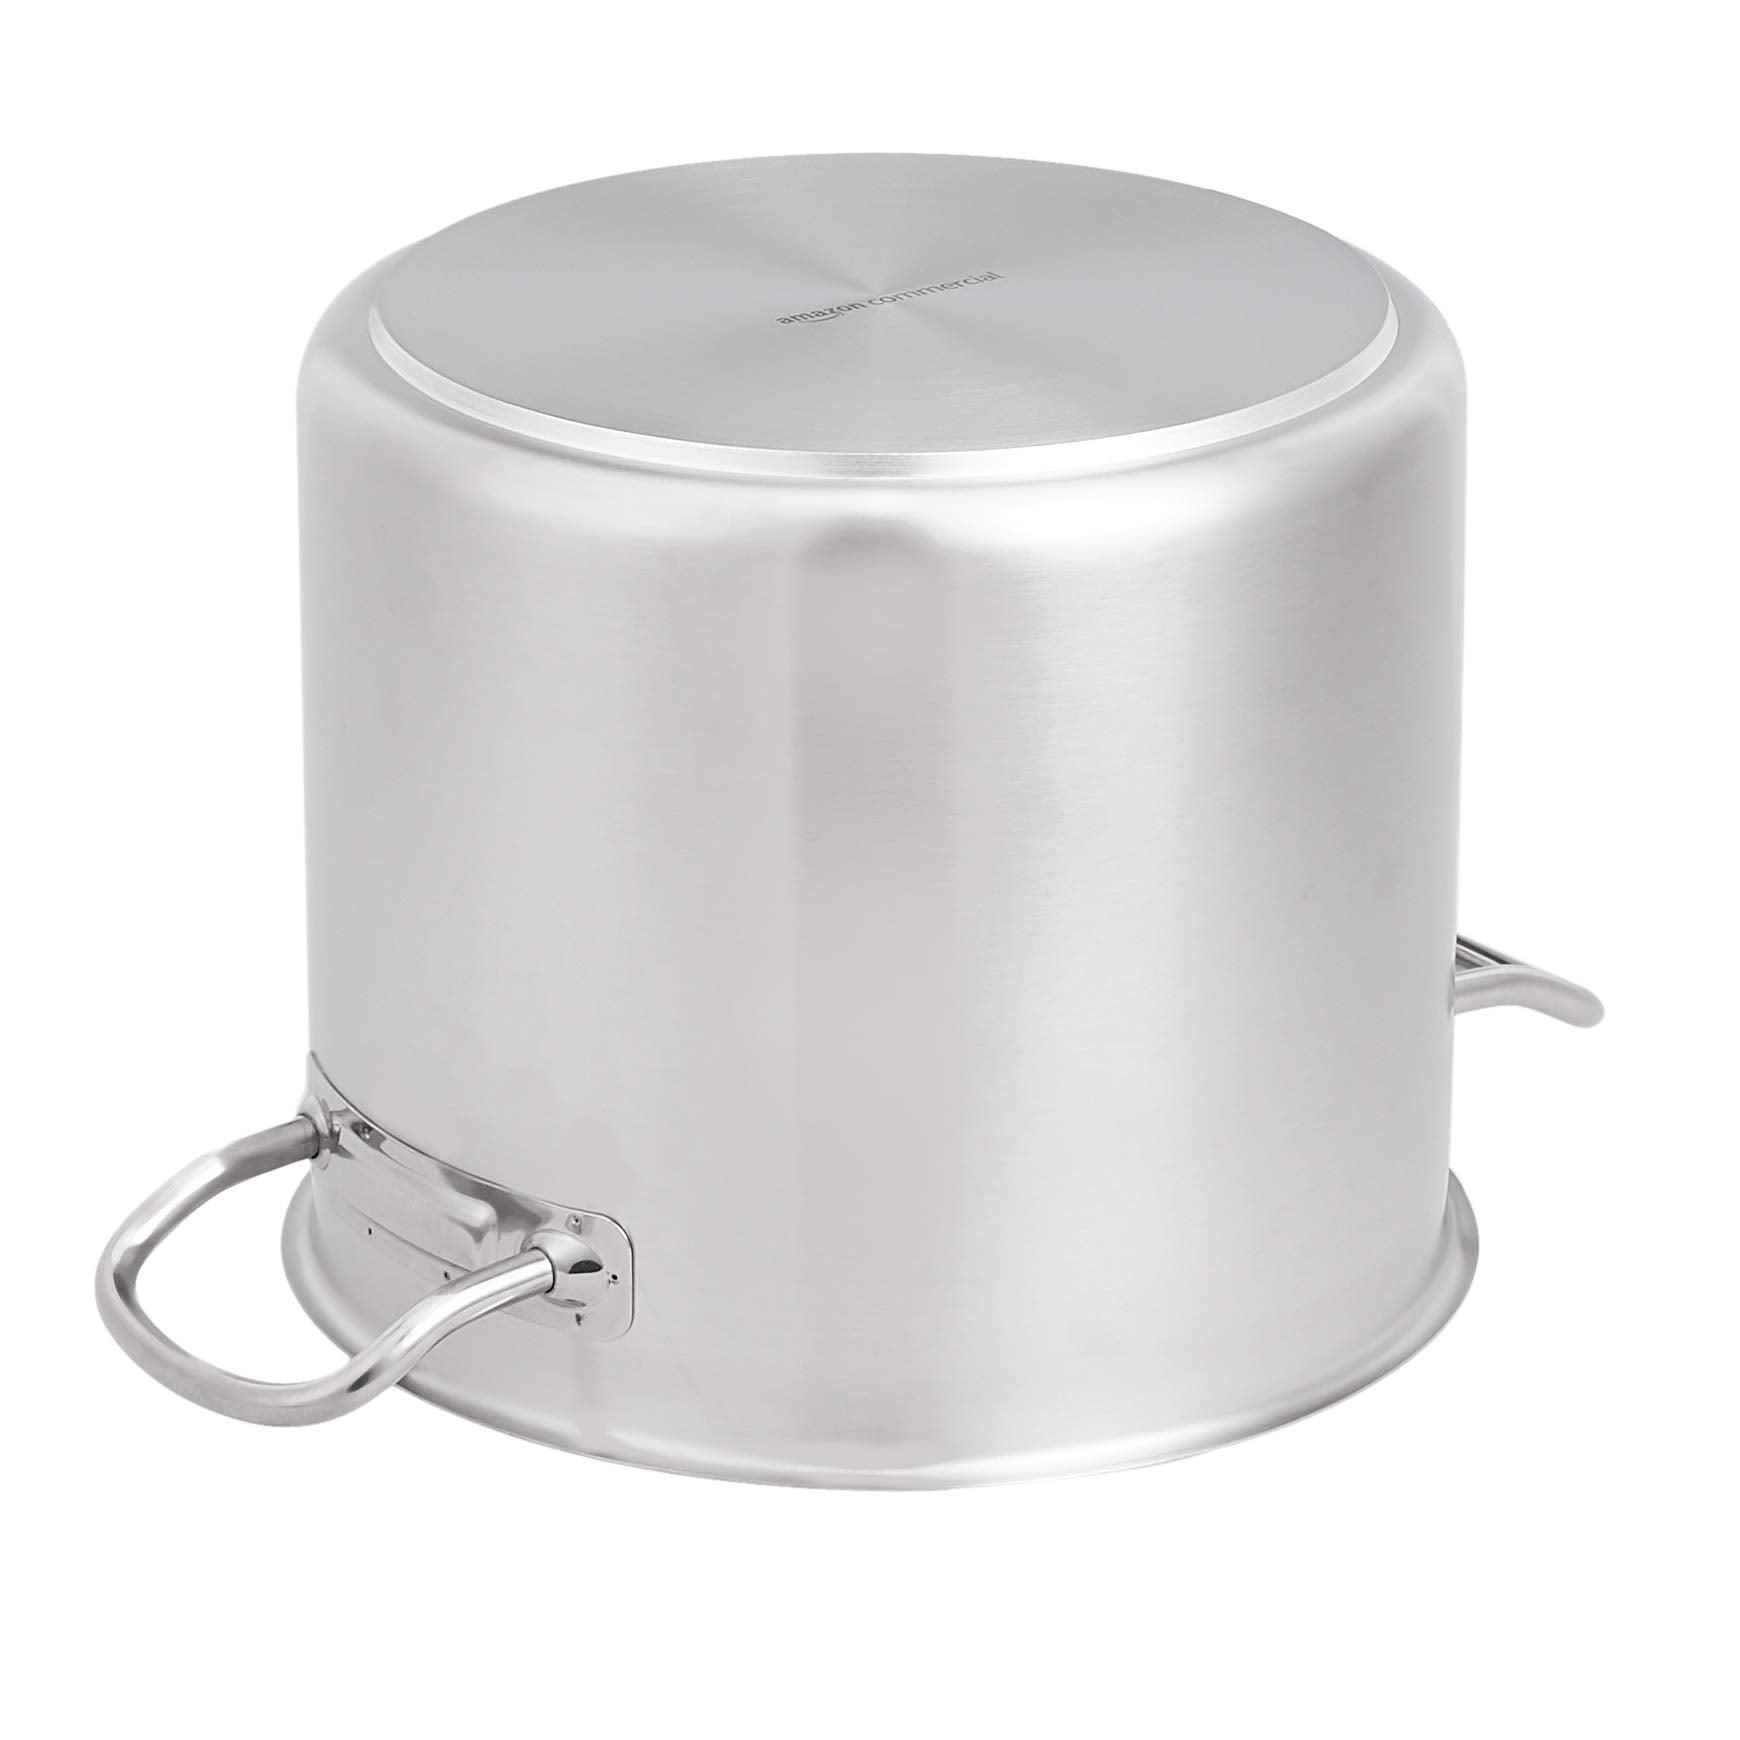 AmazonCommercial 12QT Stainless Steel Aluminum-Clad Stock Pot with Cover - CookCave